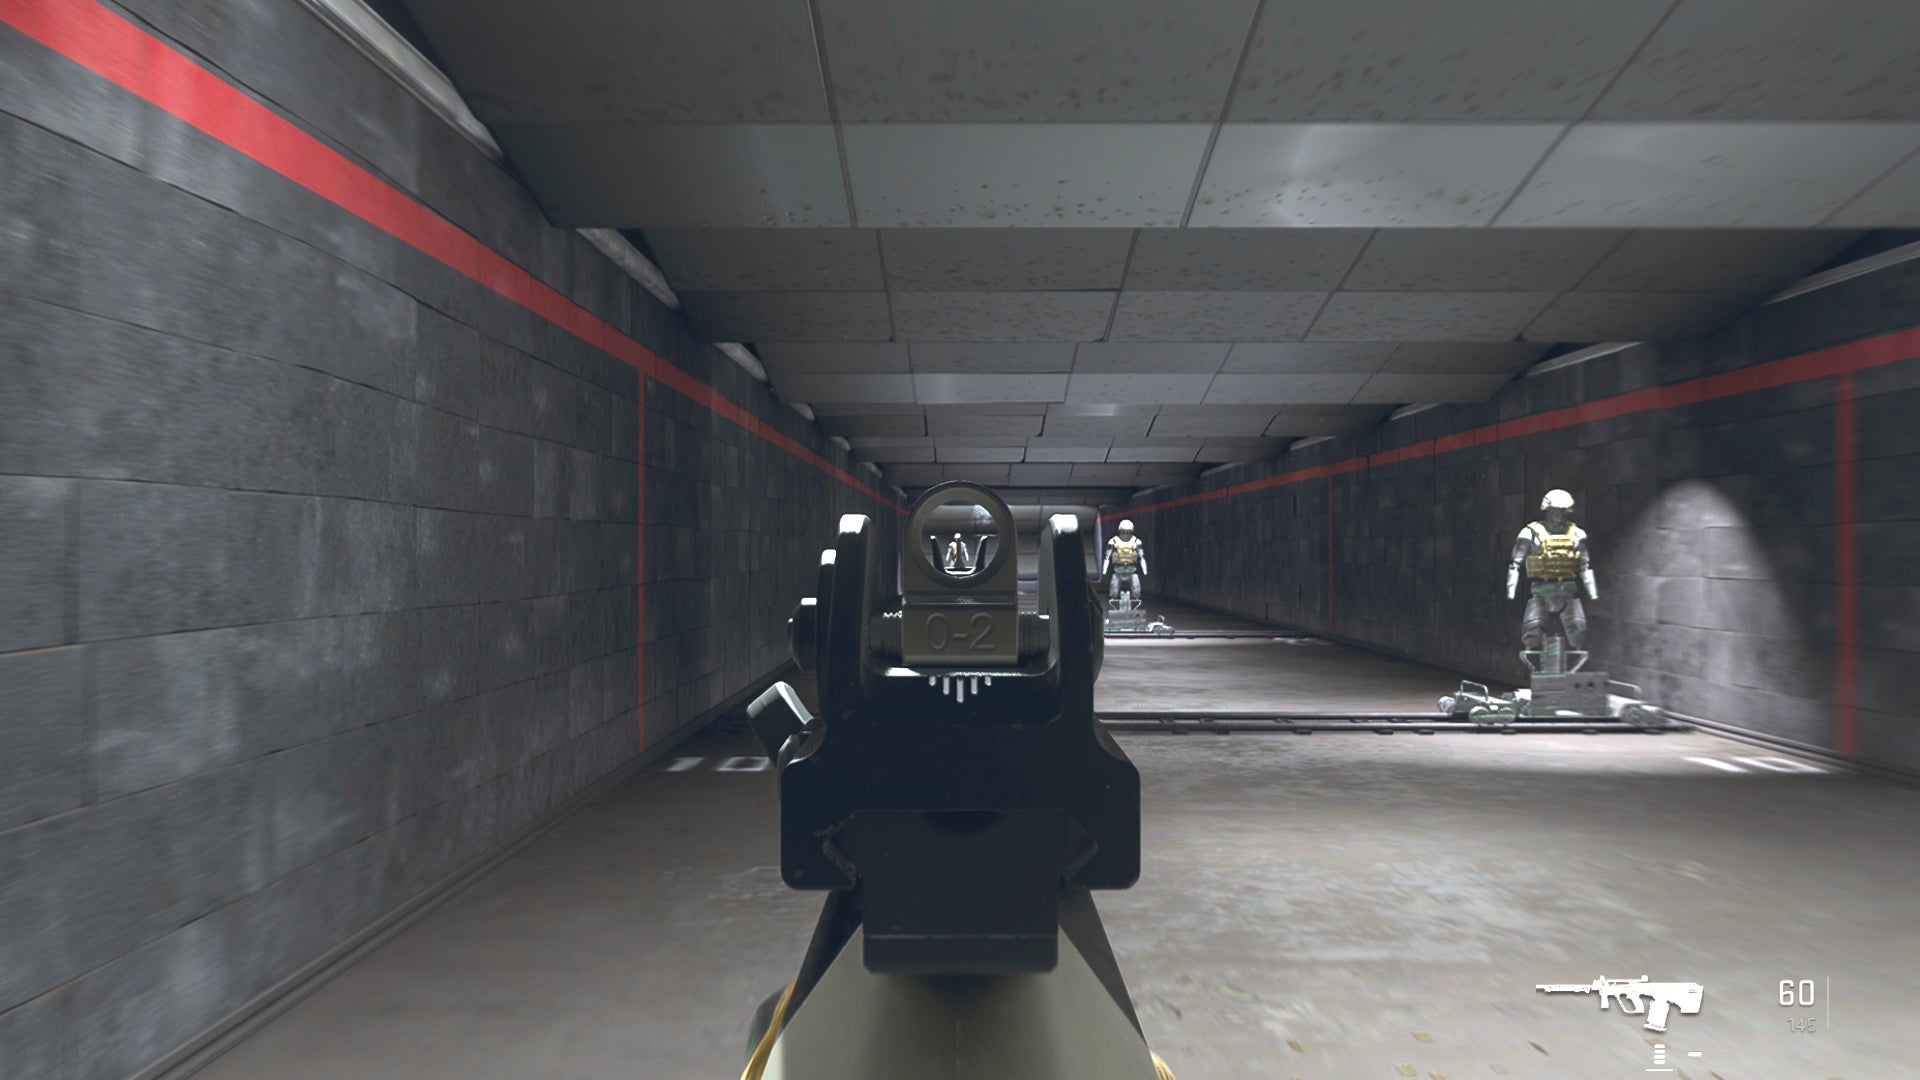 The player in Warzone 2.0 aims at a training dummy with the HCR 56 ironsights.